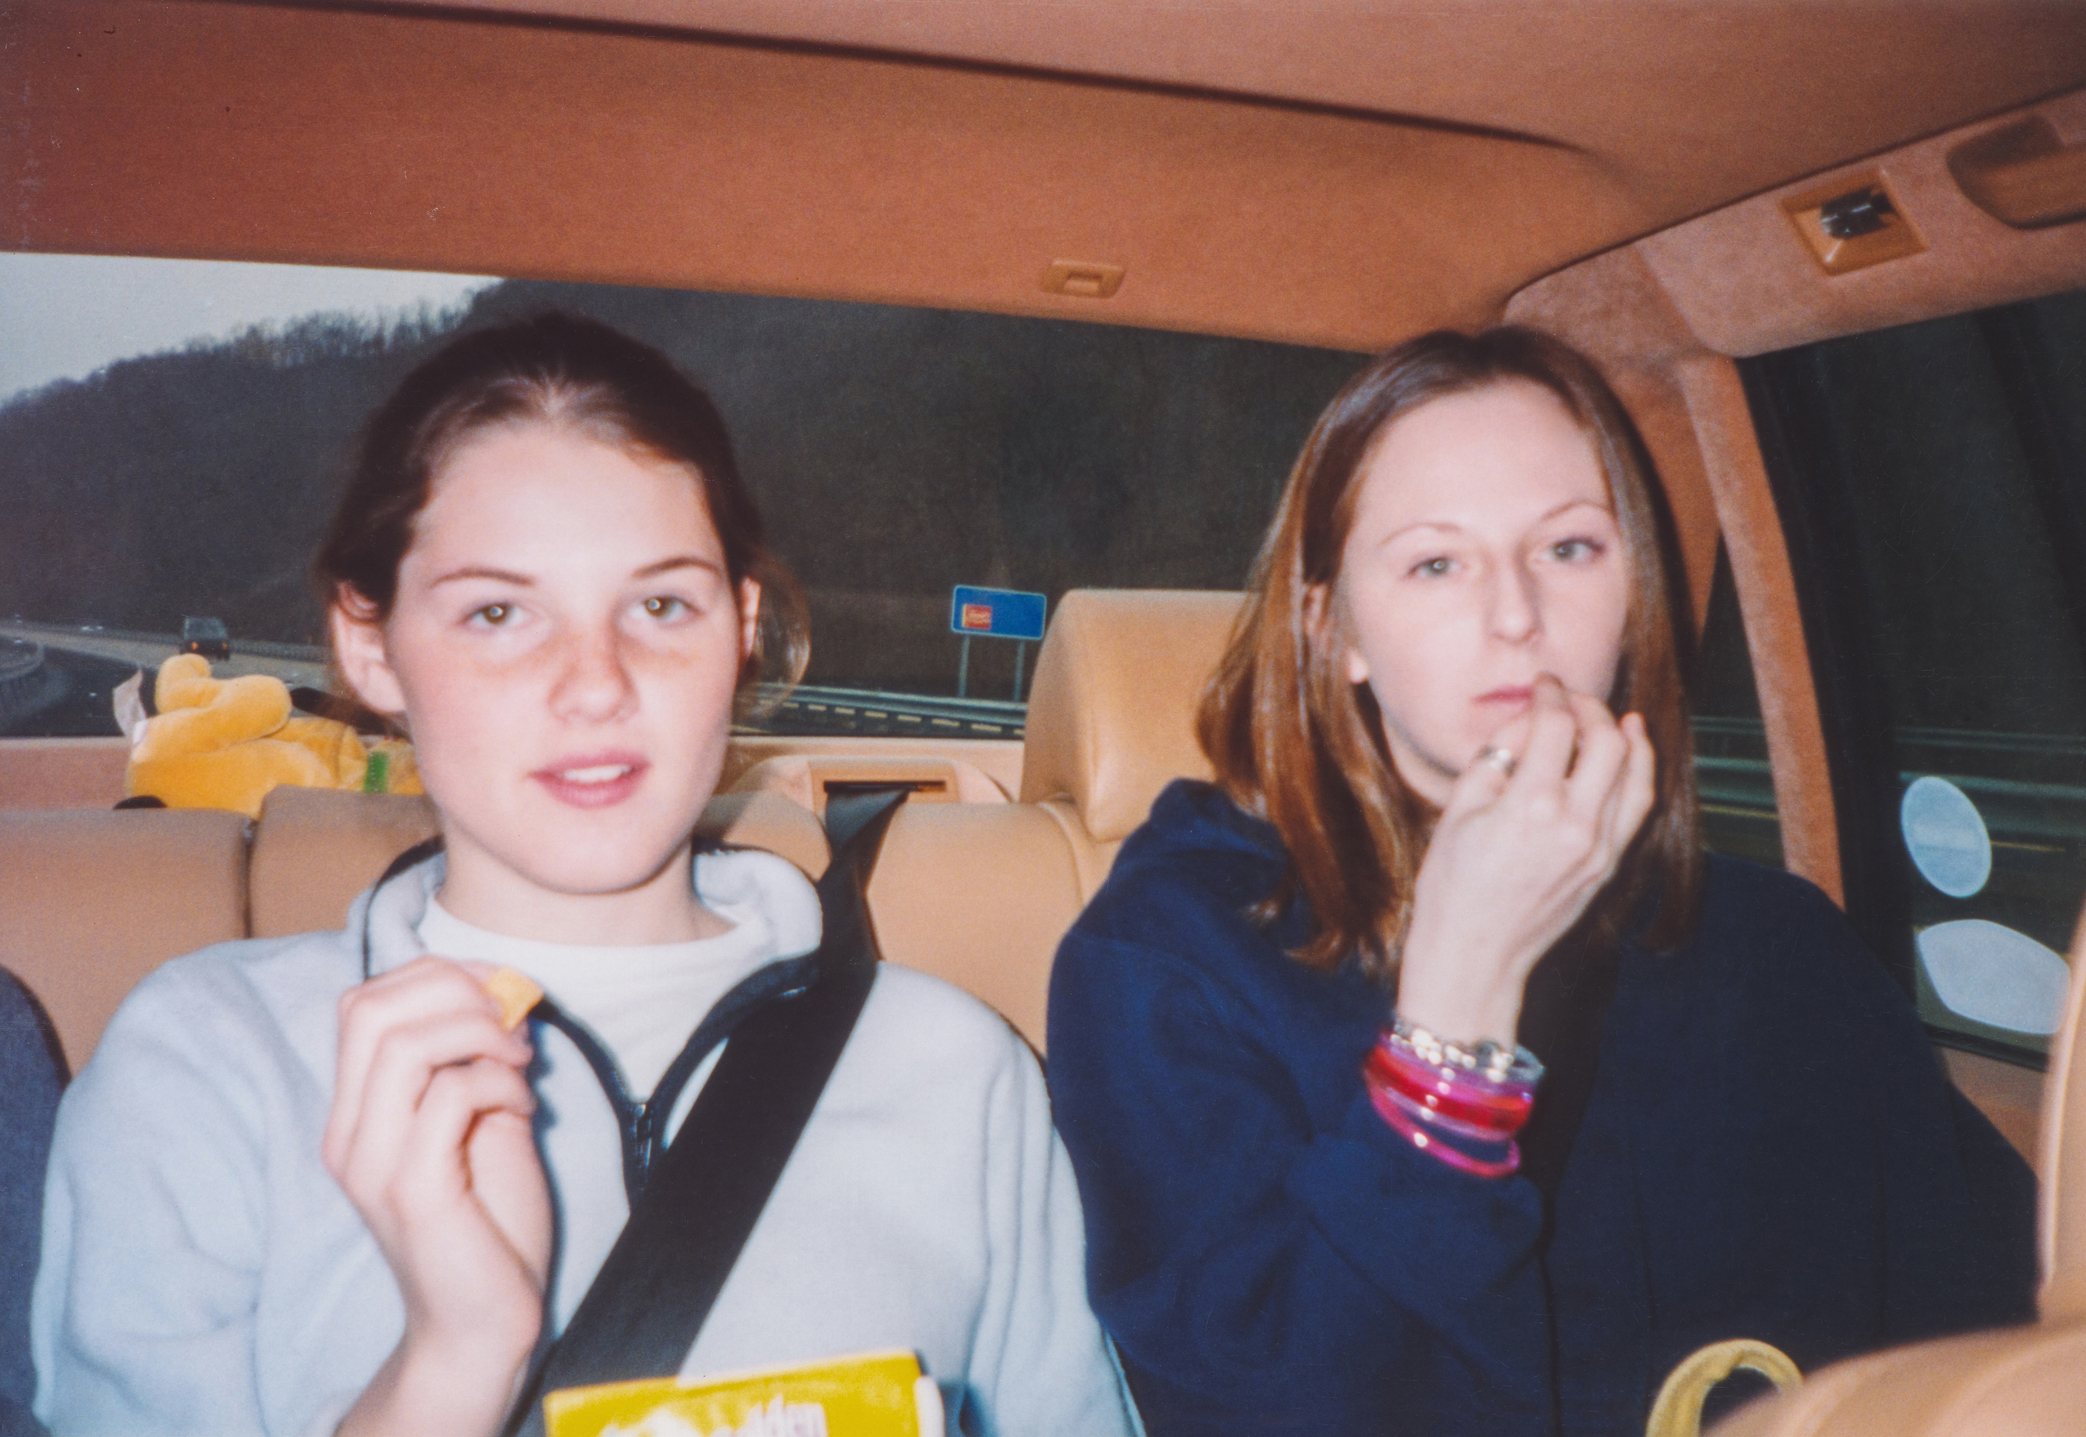 Two individuals in a car&#x27;s backseat, one eating snacks, the other looking forward